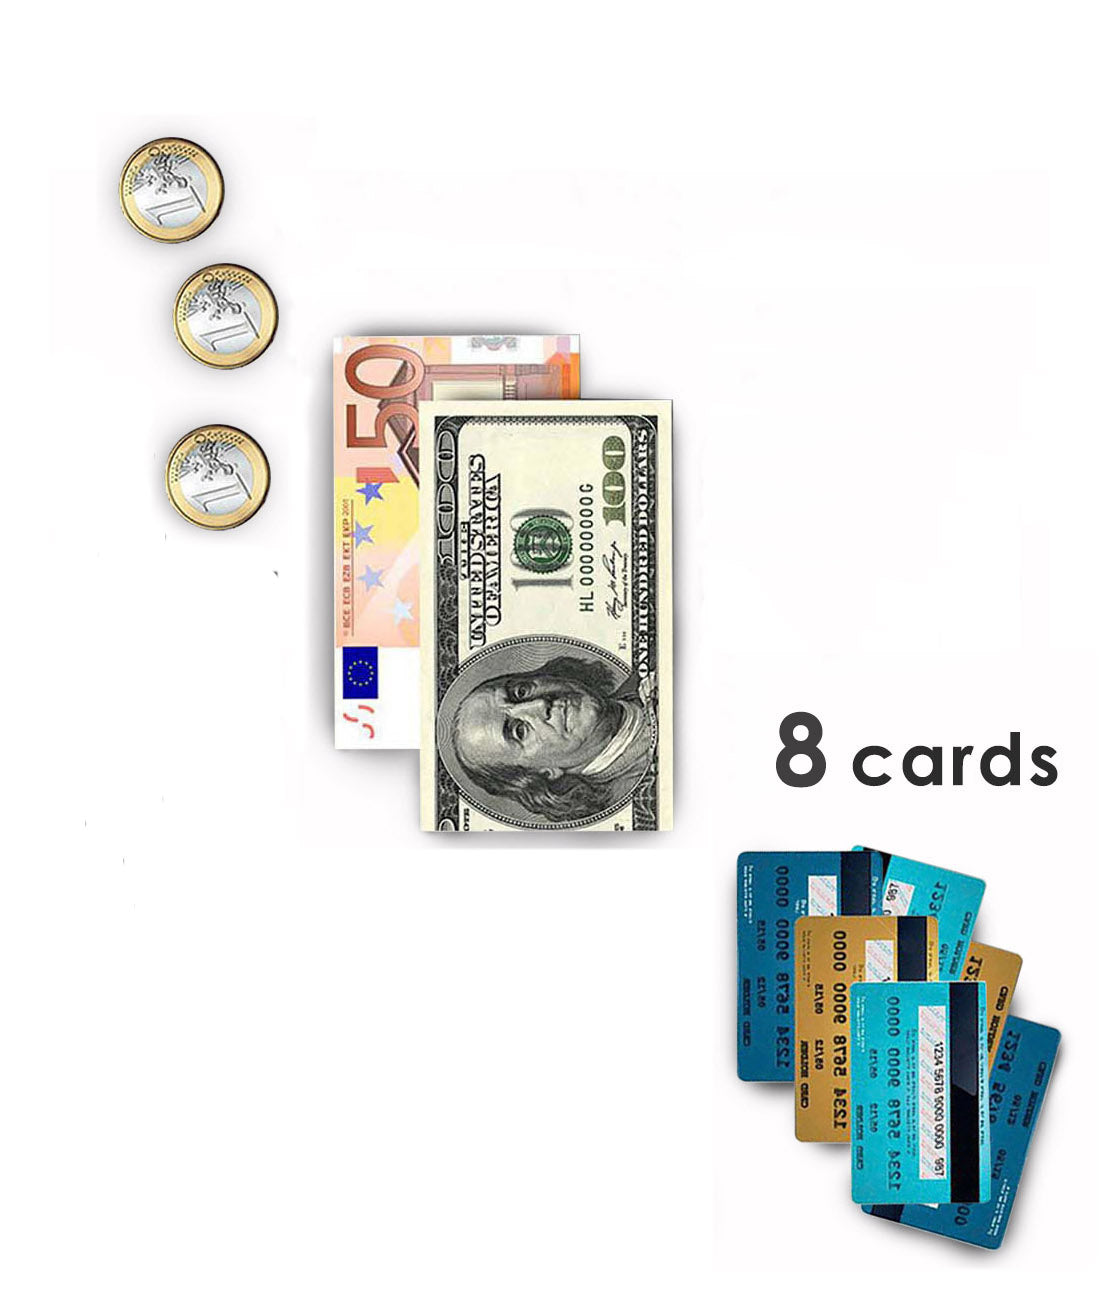 Wallet for Cards, Bills and Coins "Capacious"